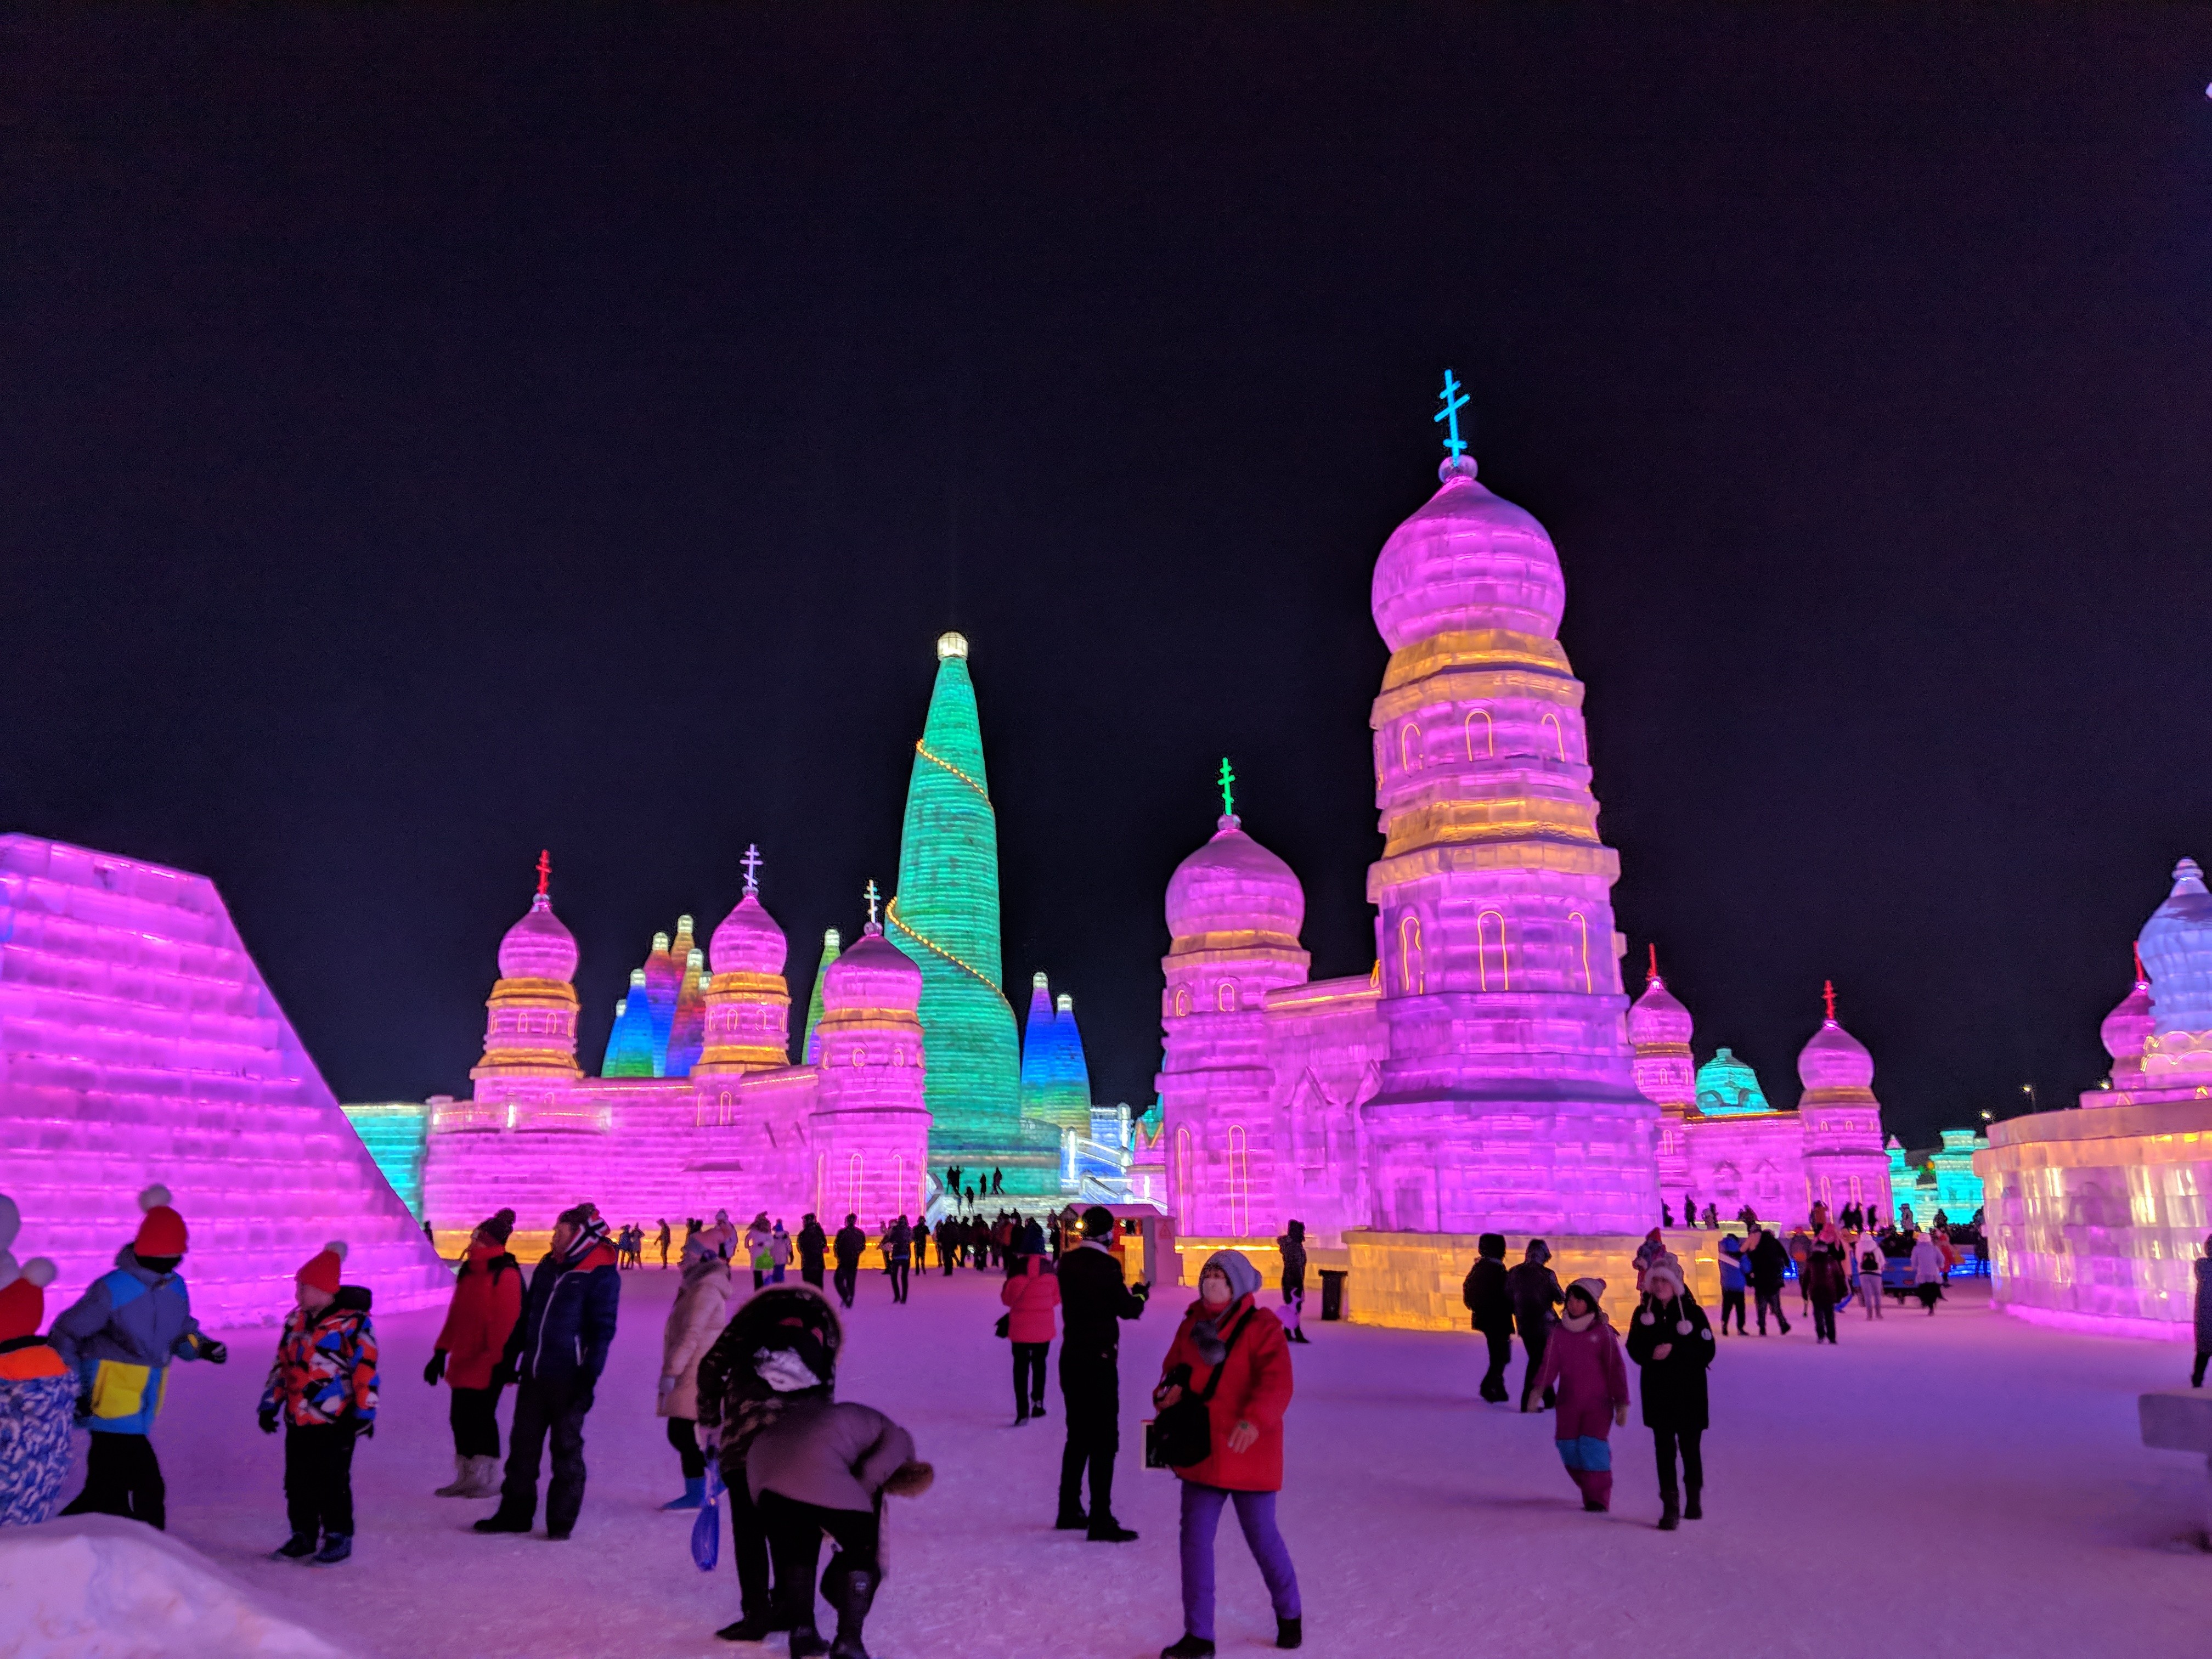 Nothing prepares the unwary visitor for what minus 30 Celsius feels like, but take the right clothes – or do some rapid shopping – and the sights at northern Chinese city’s Ice and Snow World and International Snow Sculpture Art Expo are unforgettable